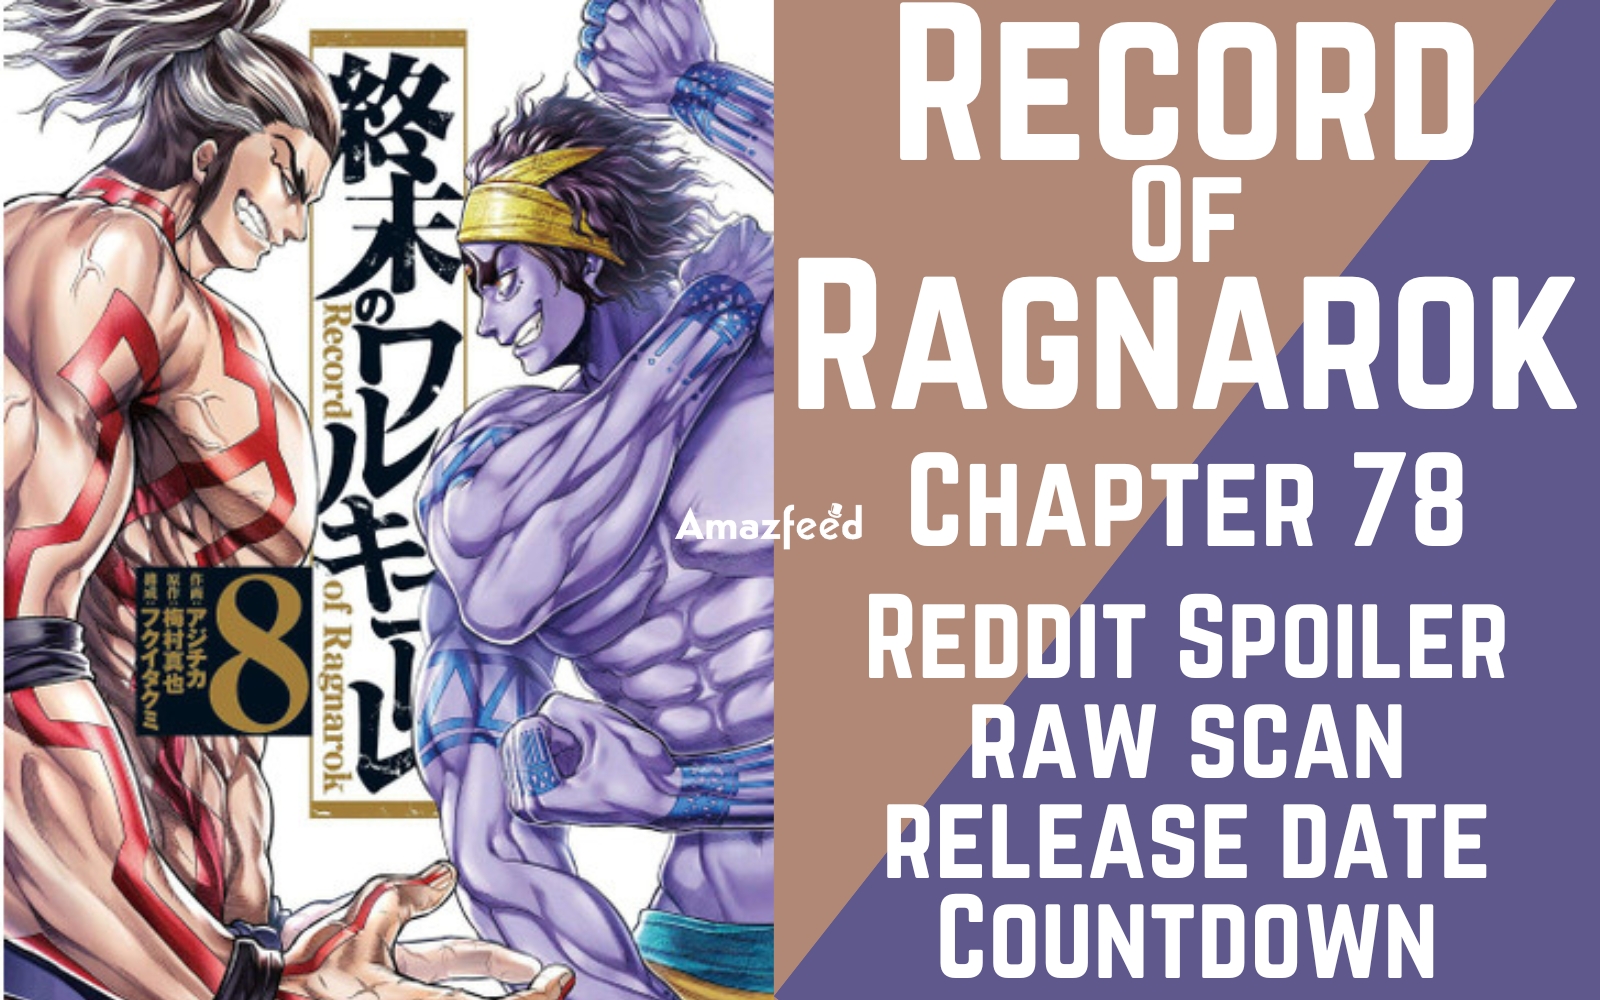 Spoilers for chapter 78 of Record of Ragnarok ⚠️ The Fighters